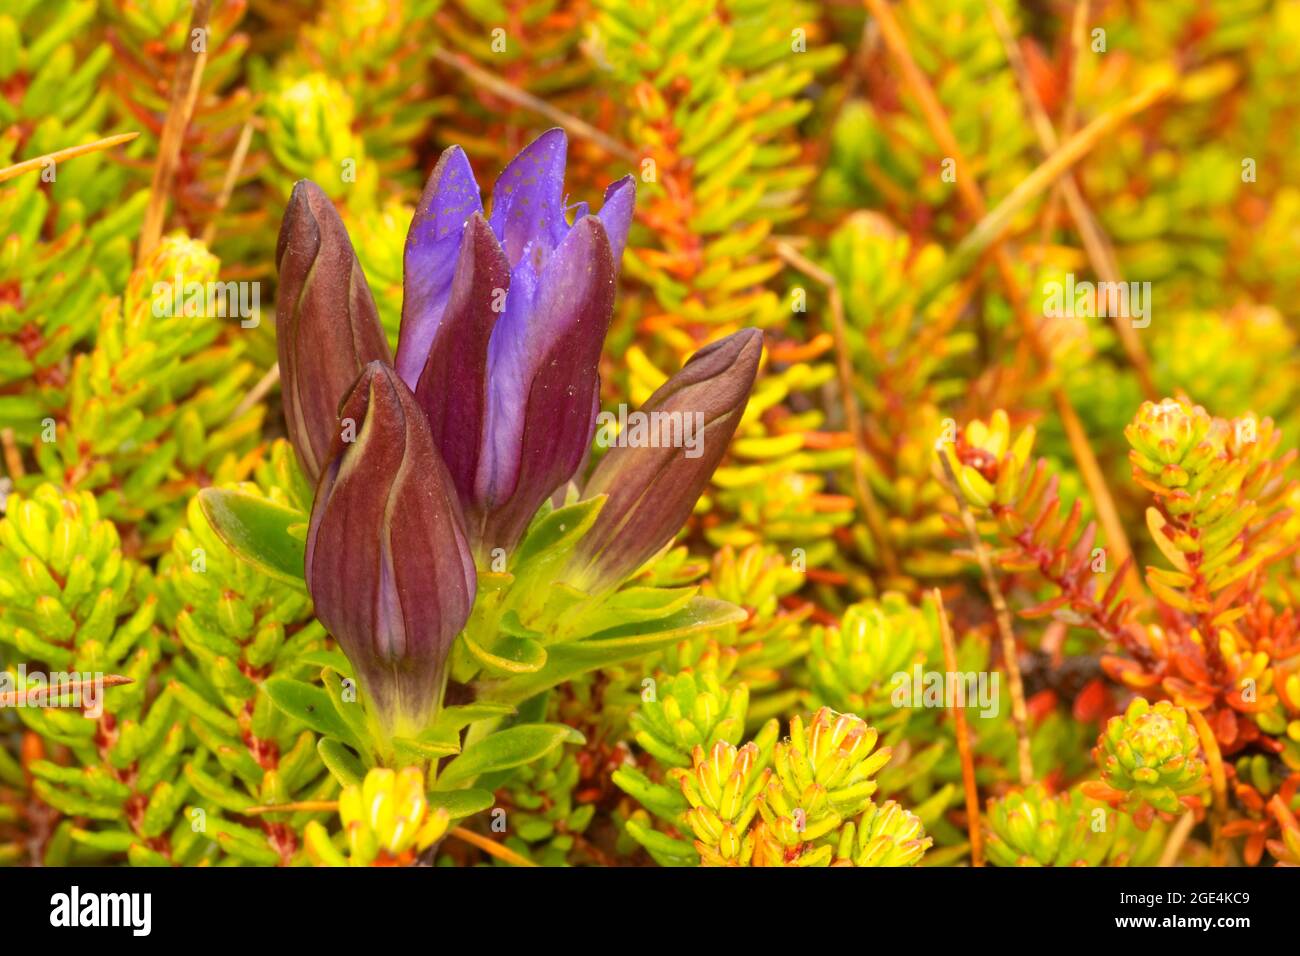 King's scepter gentian (Gentiana sceptrum), Port Orford Heads State Park, Oregon Stock Photo